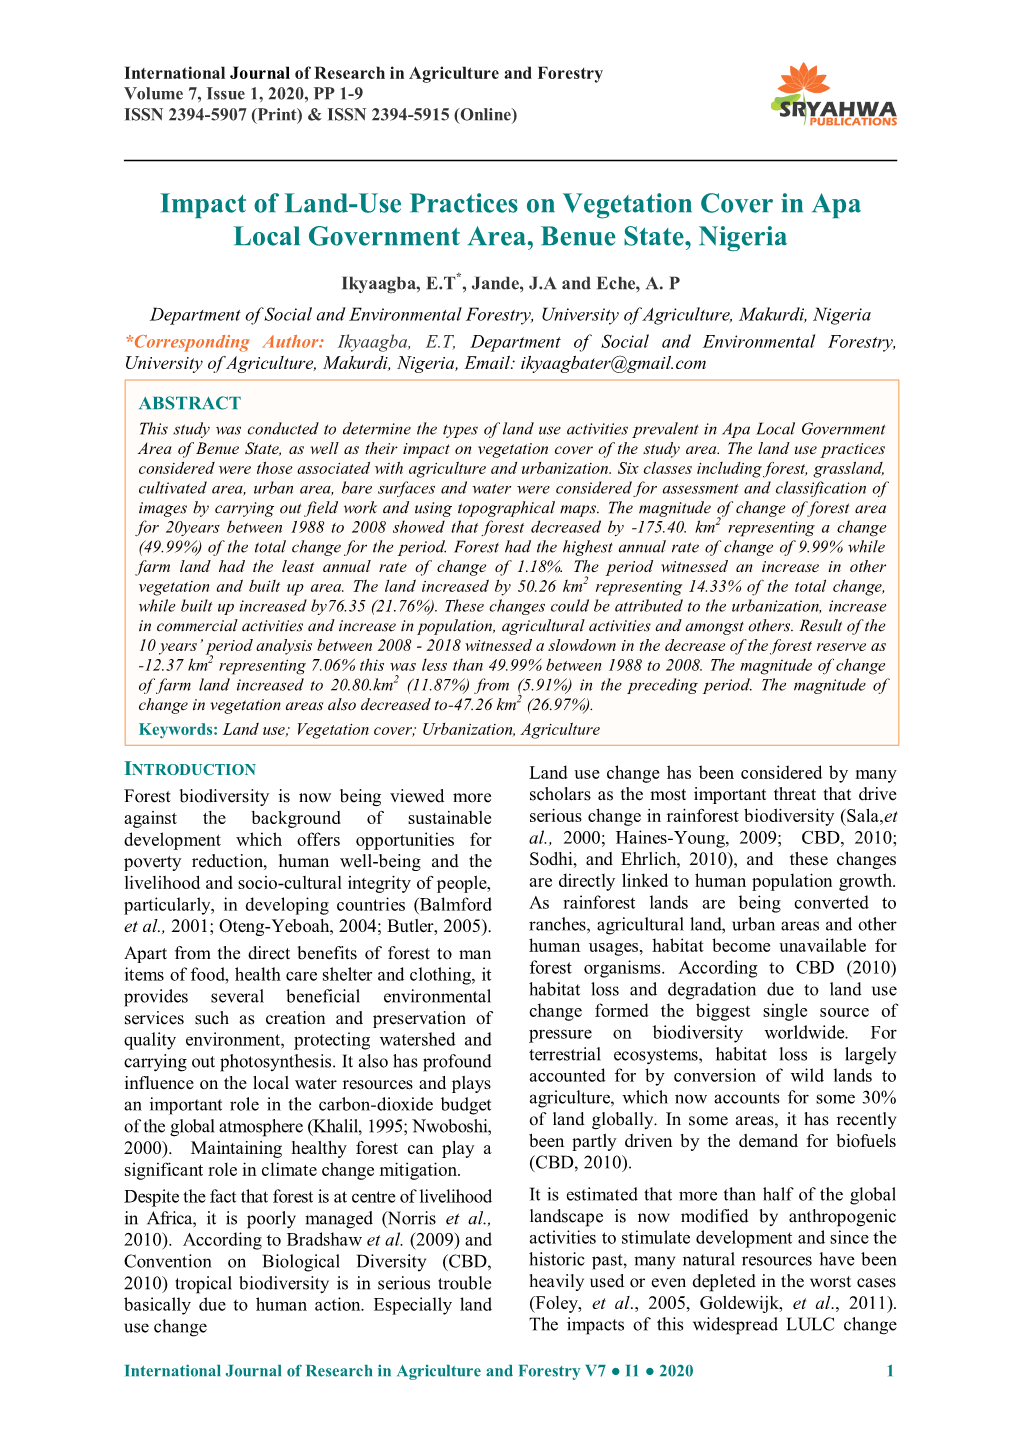 Impact of Land-Use Practices on Vegetation Cover in Apa Local Government Area, Benue State, Nigeria